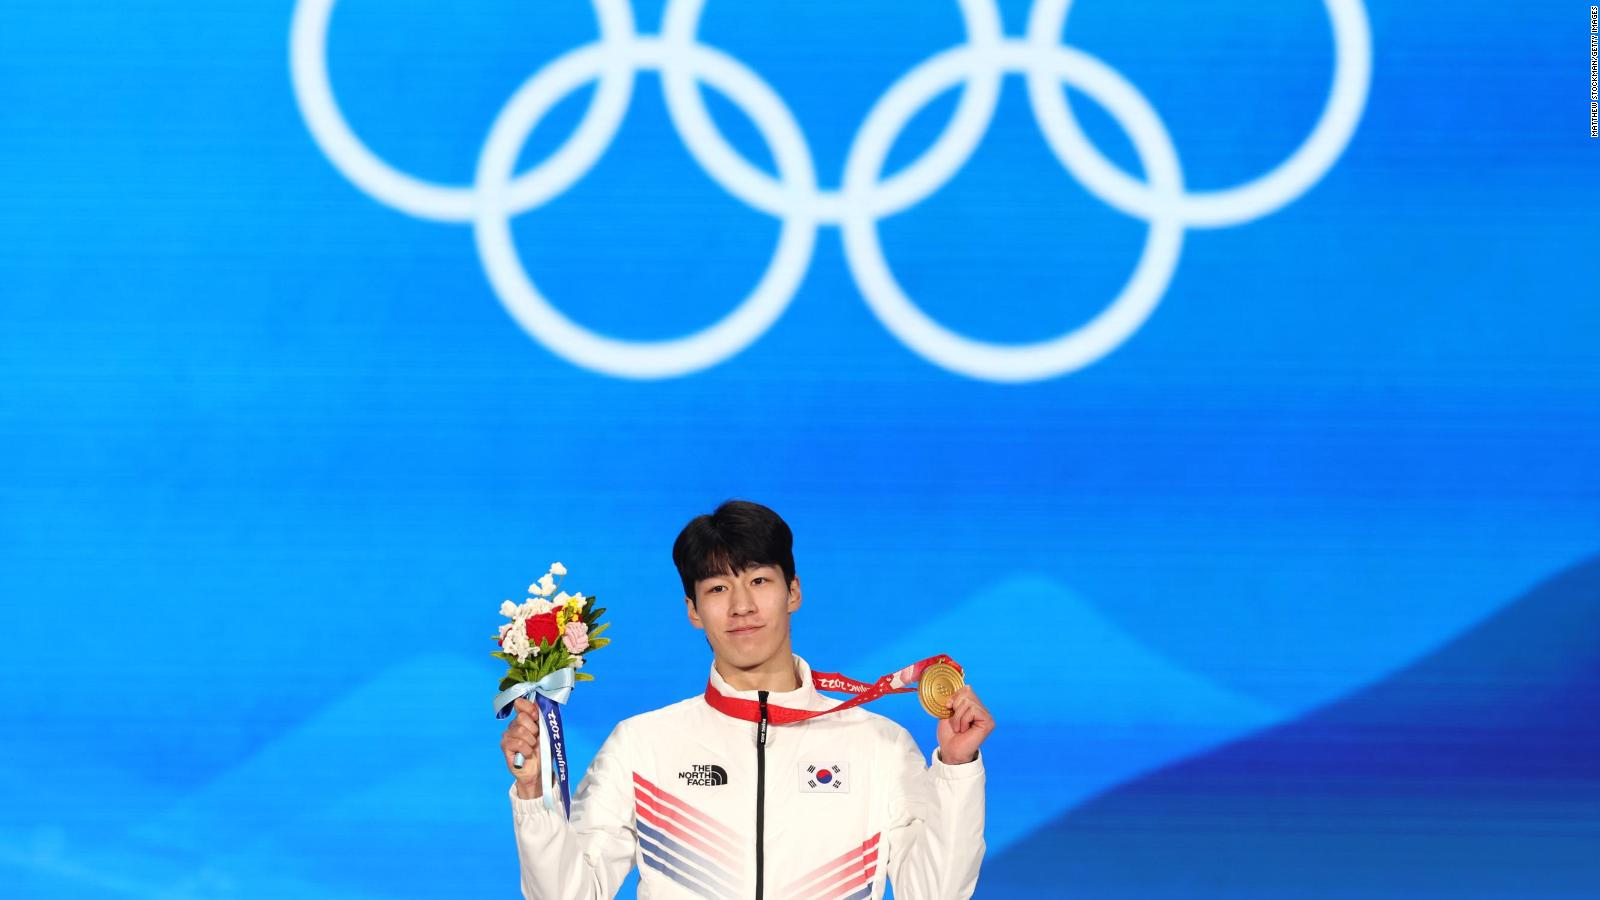 Choi MinJeong 'Queen of Korean Short Track' bounces back from tearful